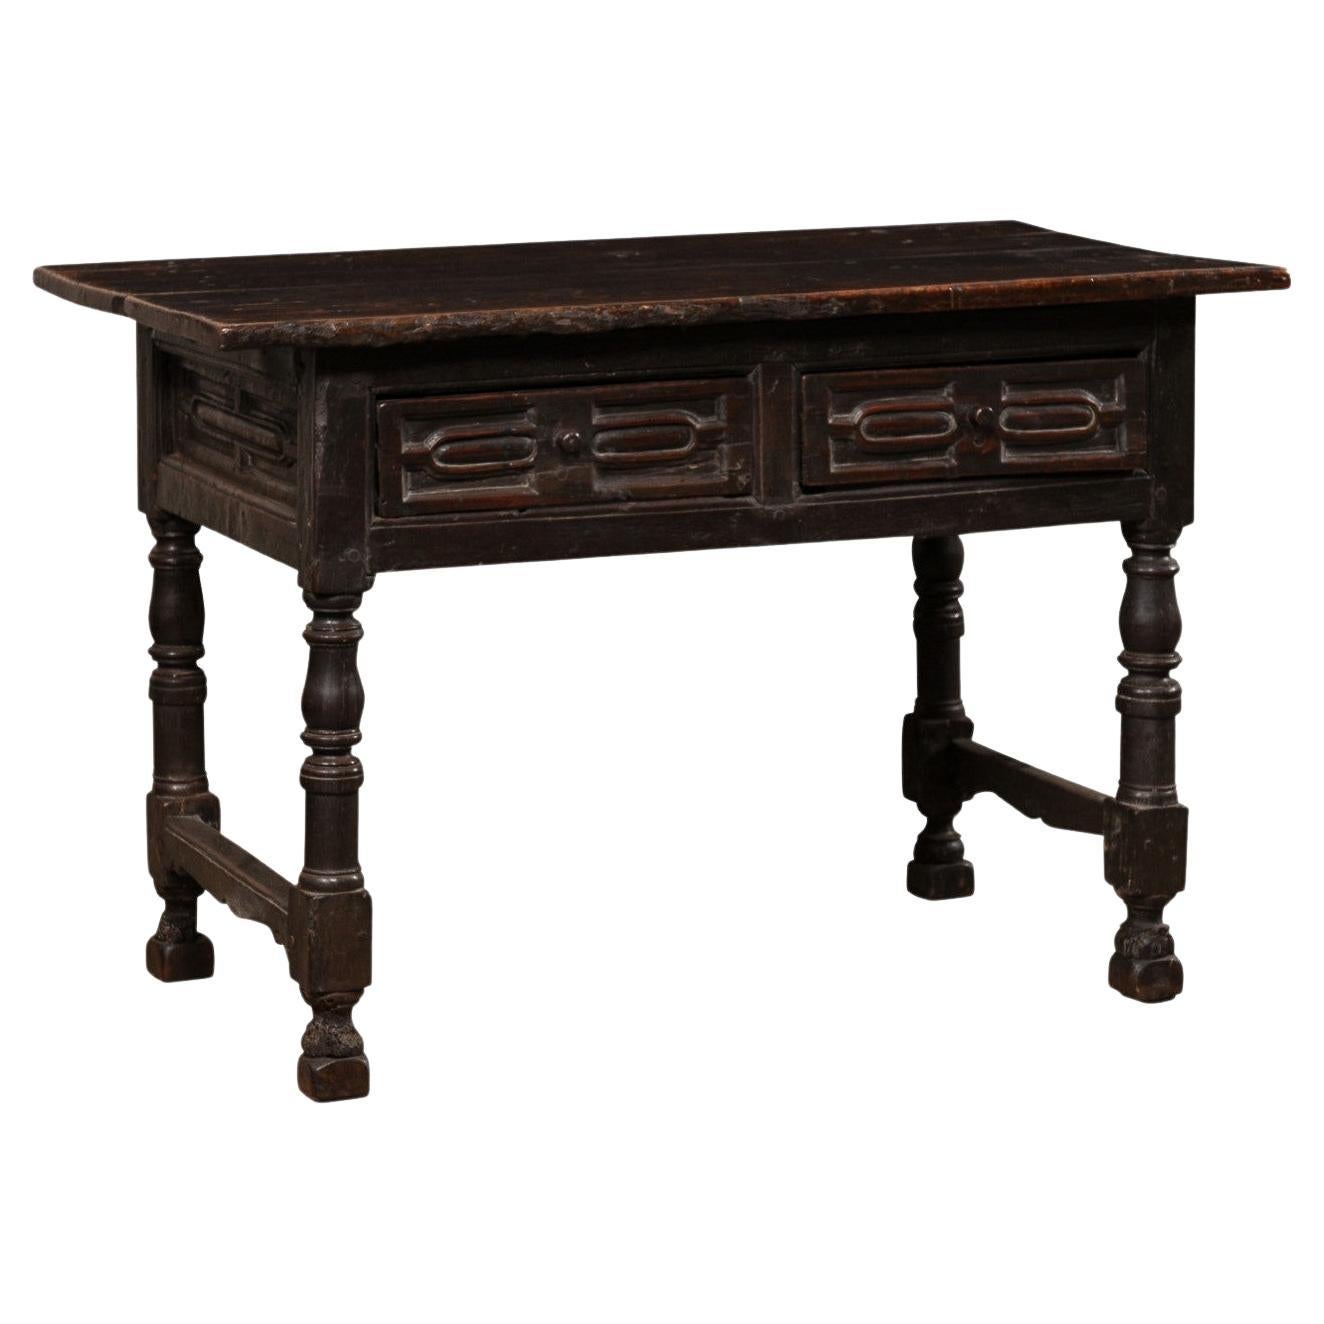 Italian Carved-Walnut Occasional Table W/Drawers, All Sides Carved, Early 18th C